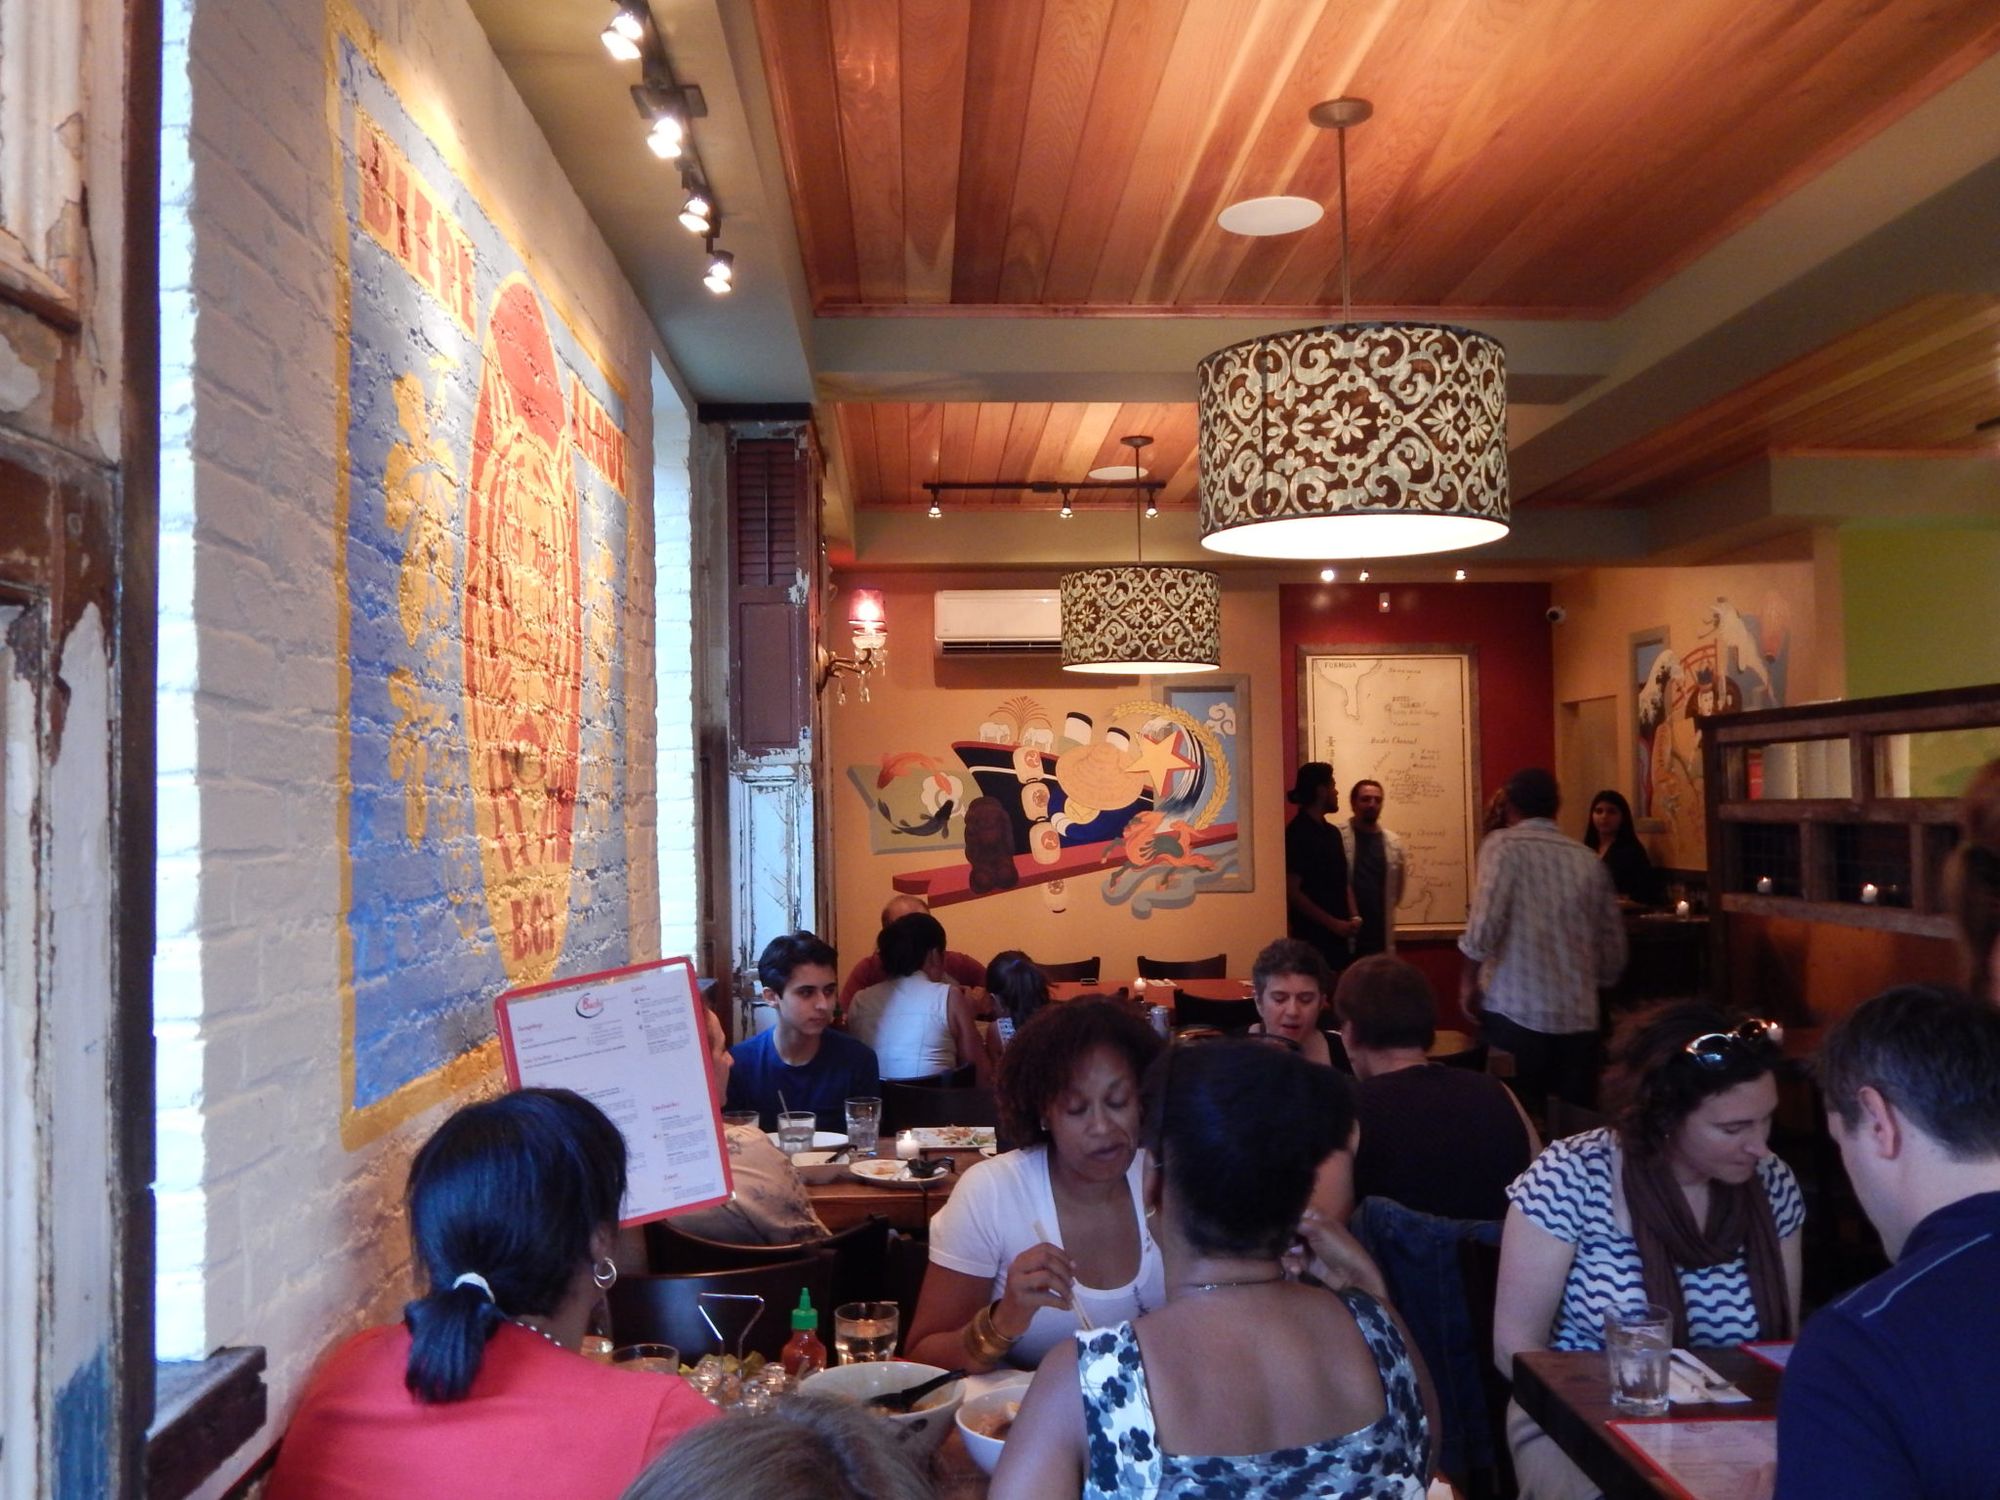 Scenes From Bashi Channel’s Soft Opening; Cortelyou Restaurant Will Hold Grand Opening This Saturday